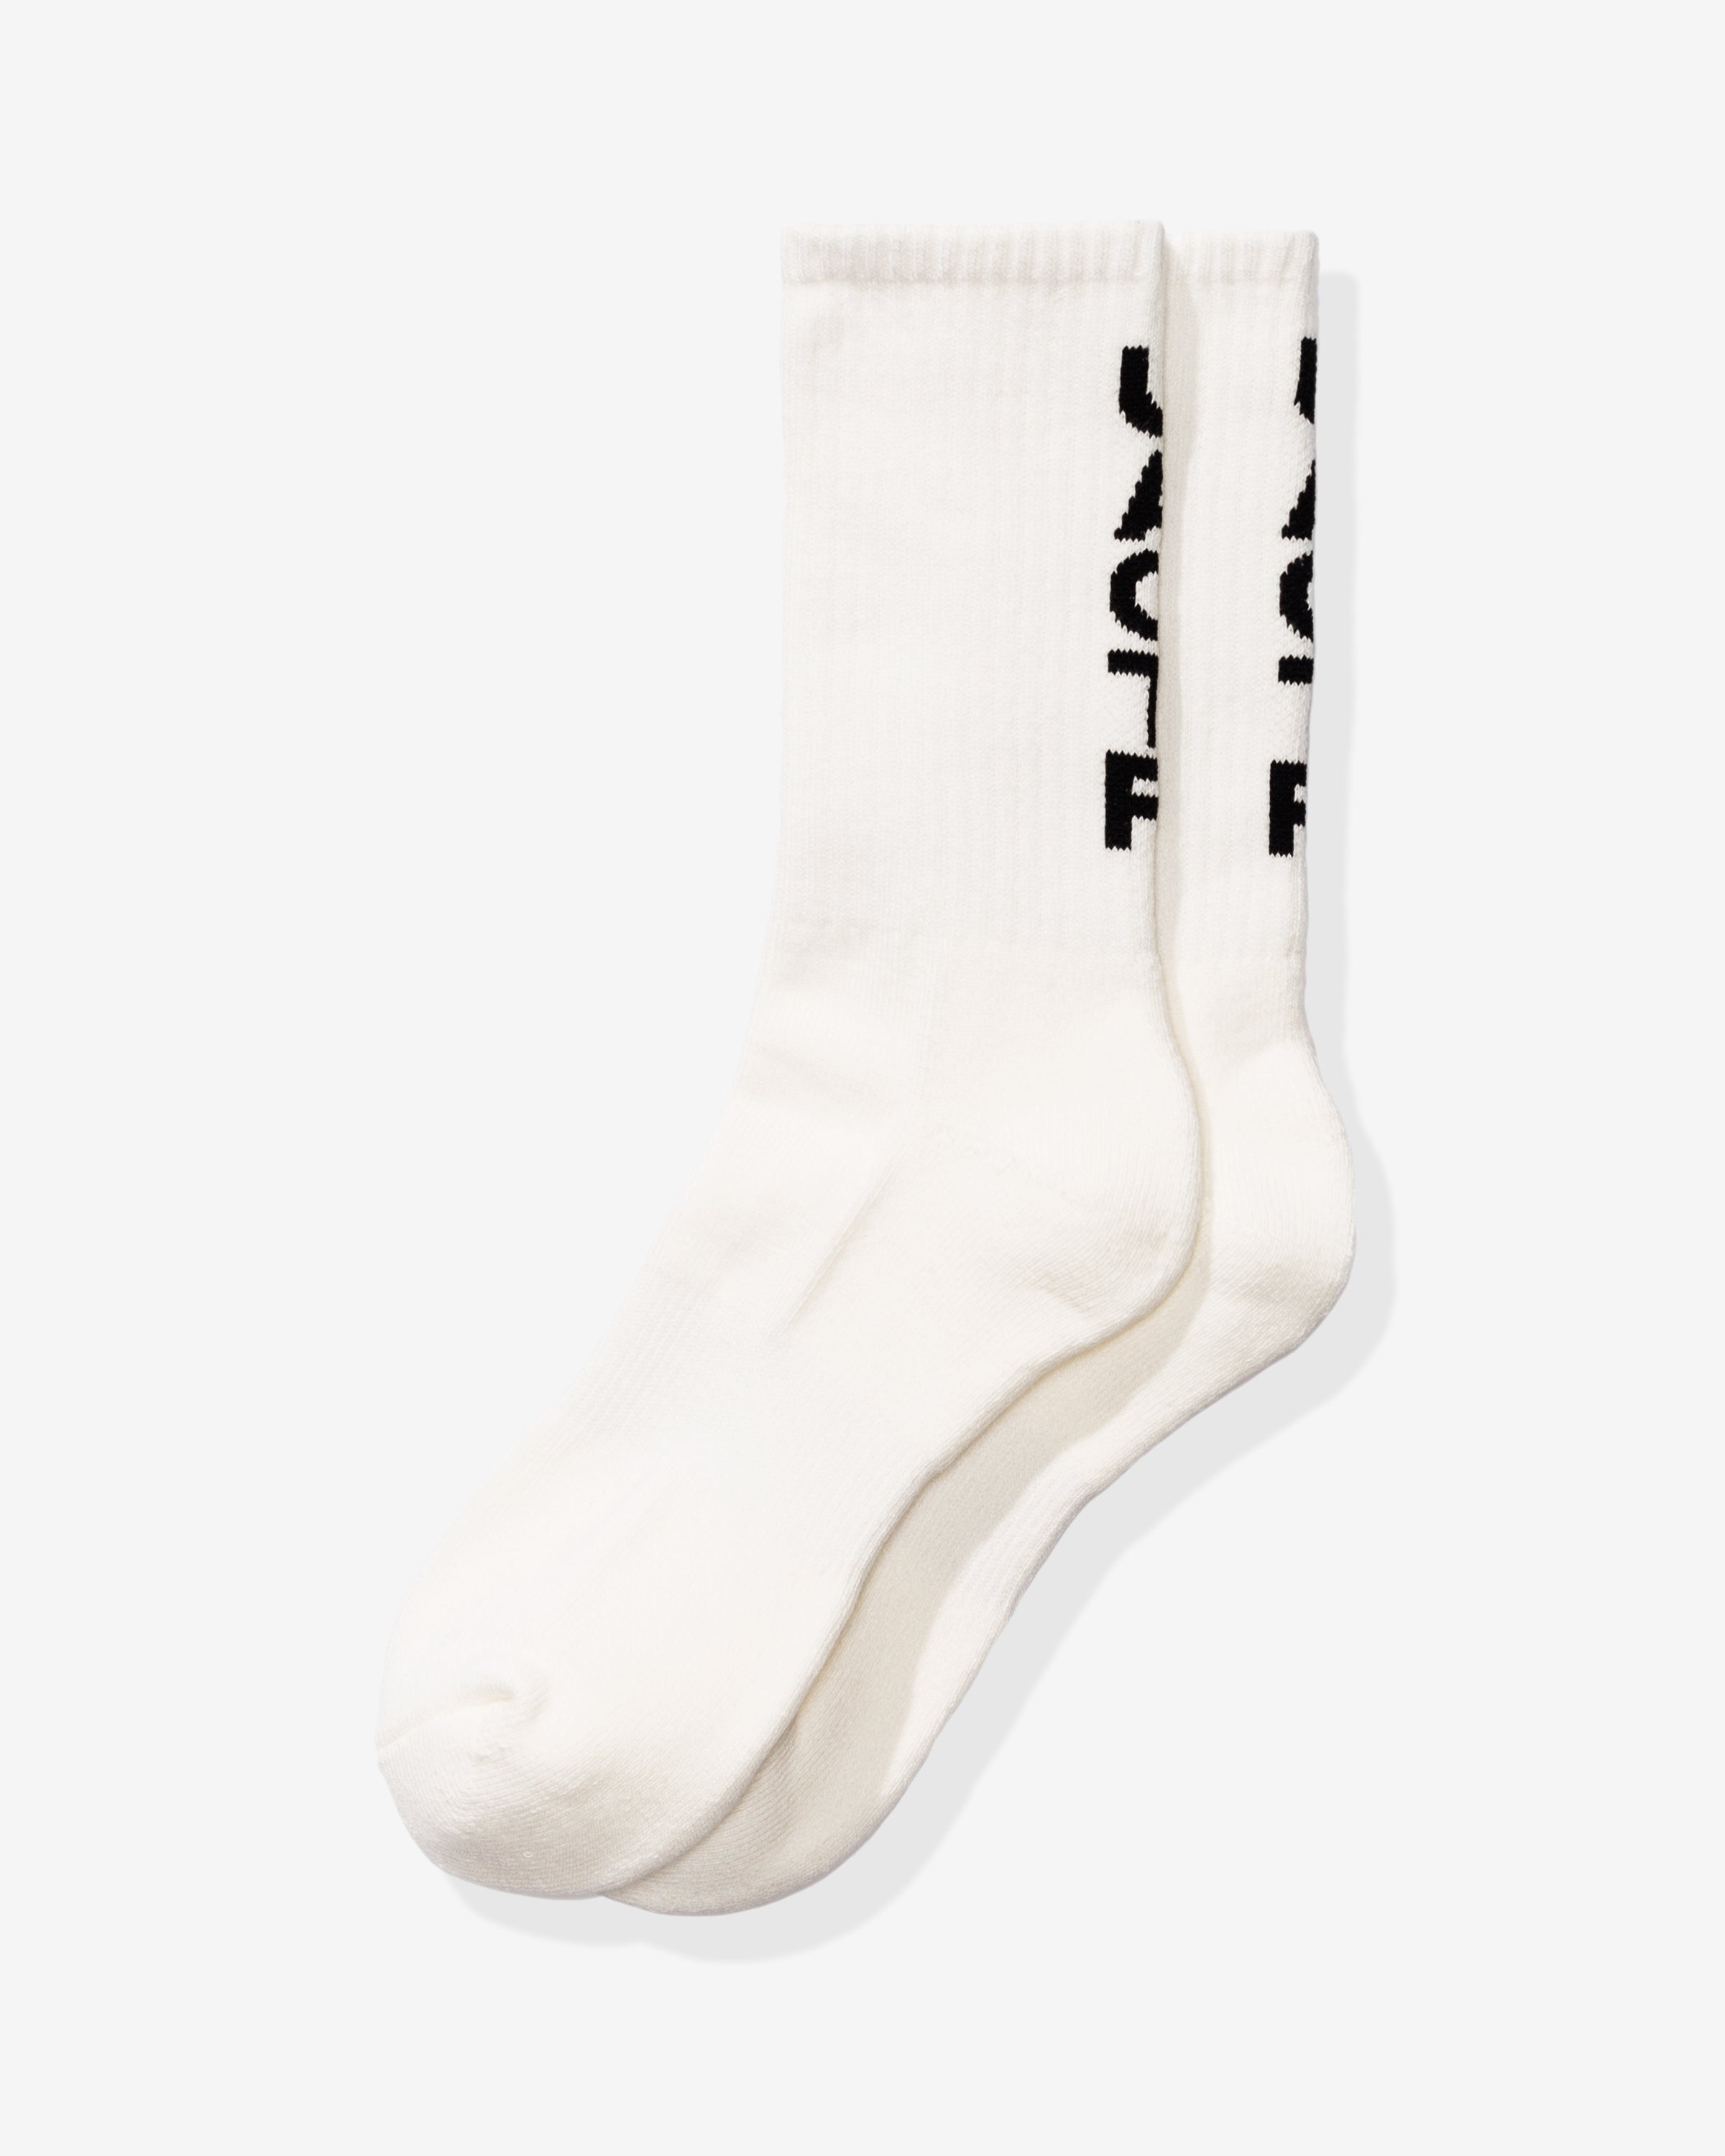 UACTP CREW SOCK – Undefeated